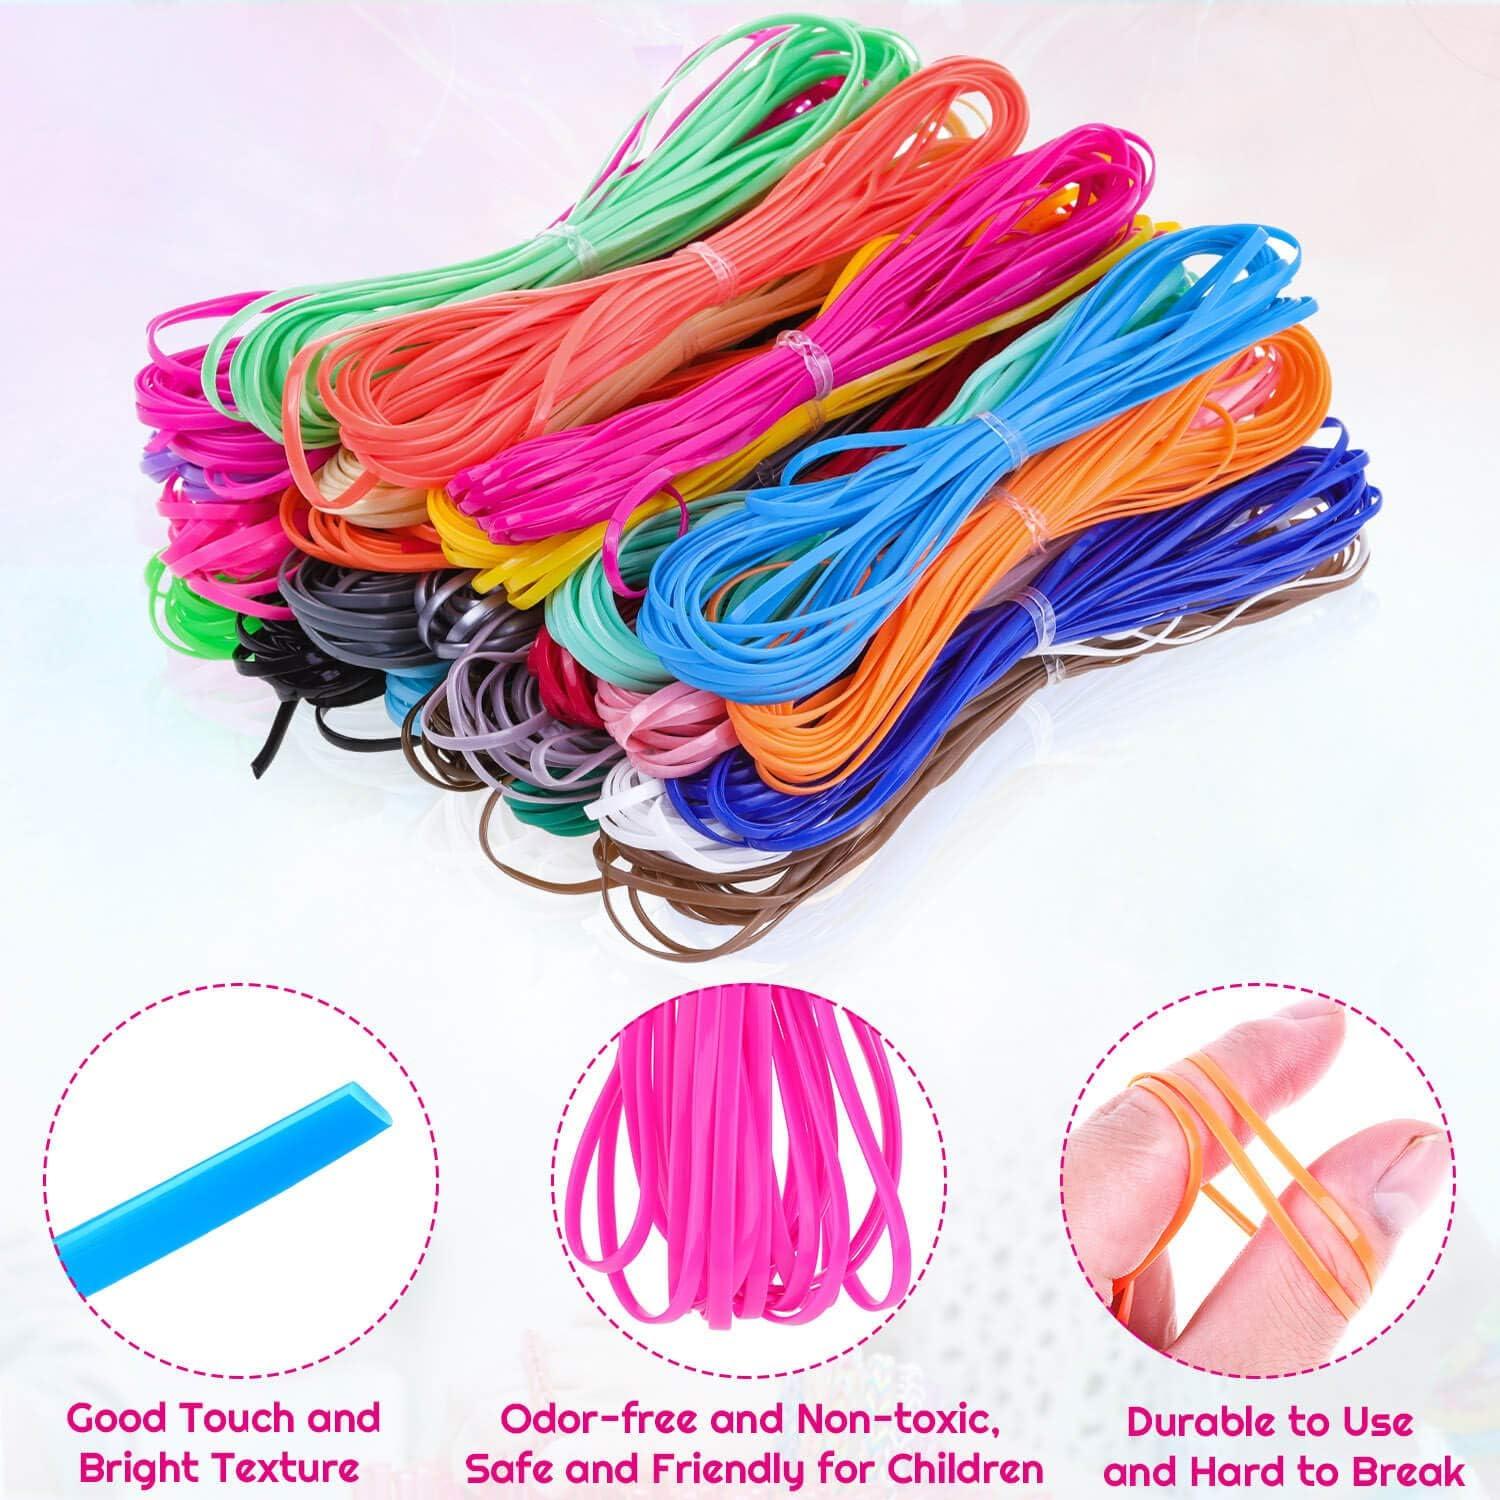 Lanyard String Cridoz 25 Colors Gimp String Plastic Lacing Cord with 20pcs  Snap Clip Hooks and Keyrings for Crafts Bracelet Lanyards and Jewelry Making  Normal Colors